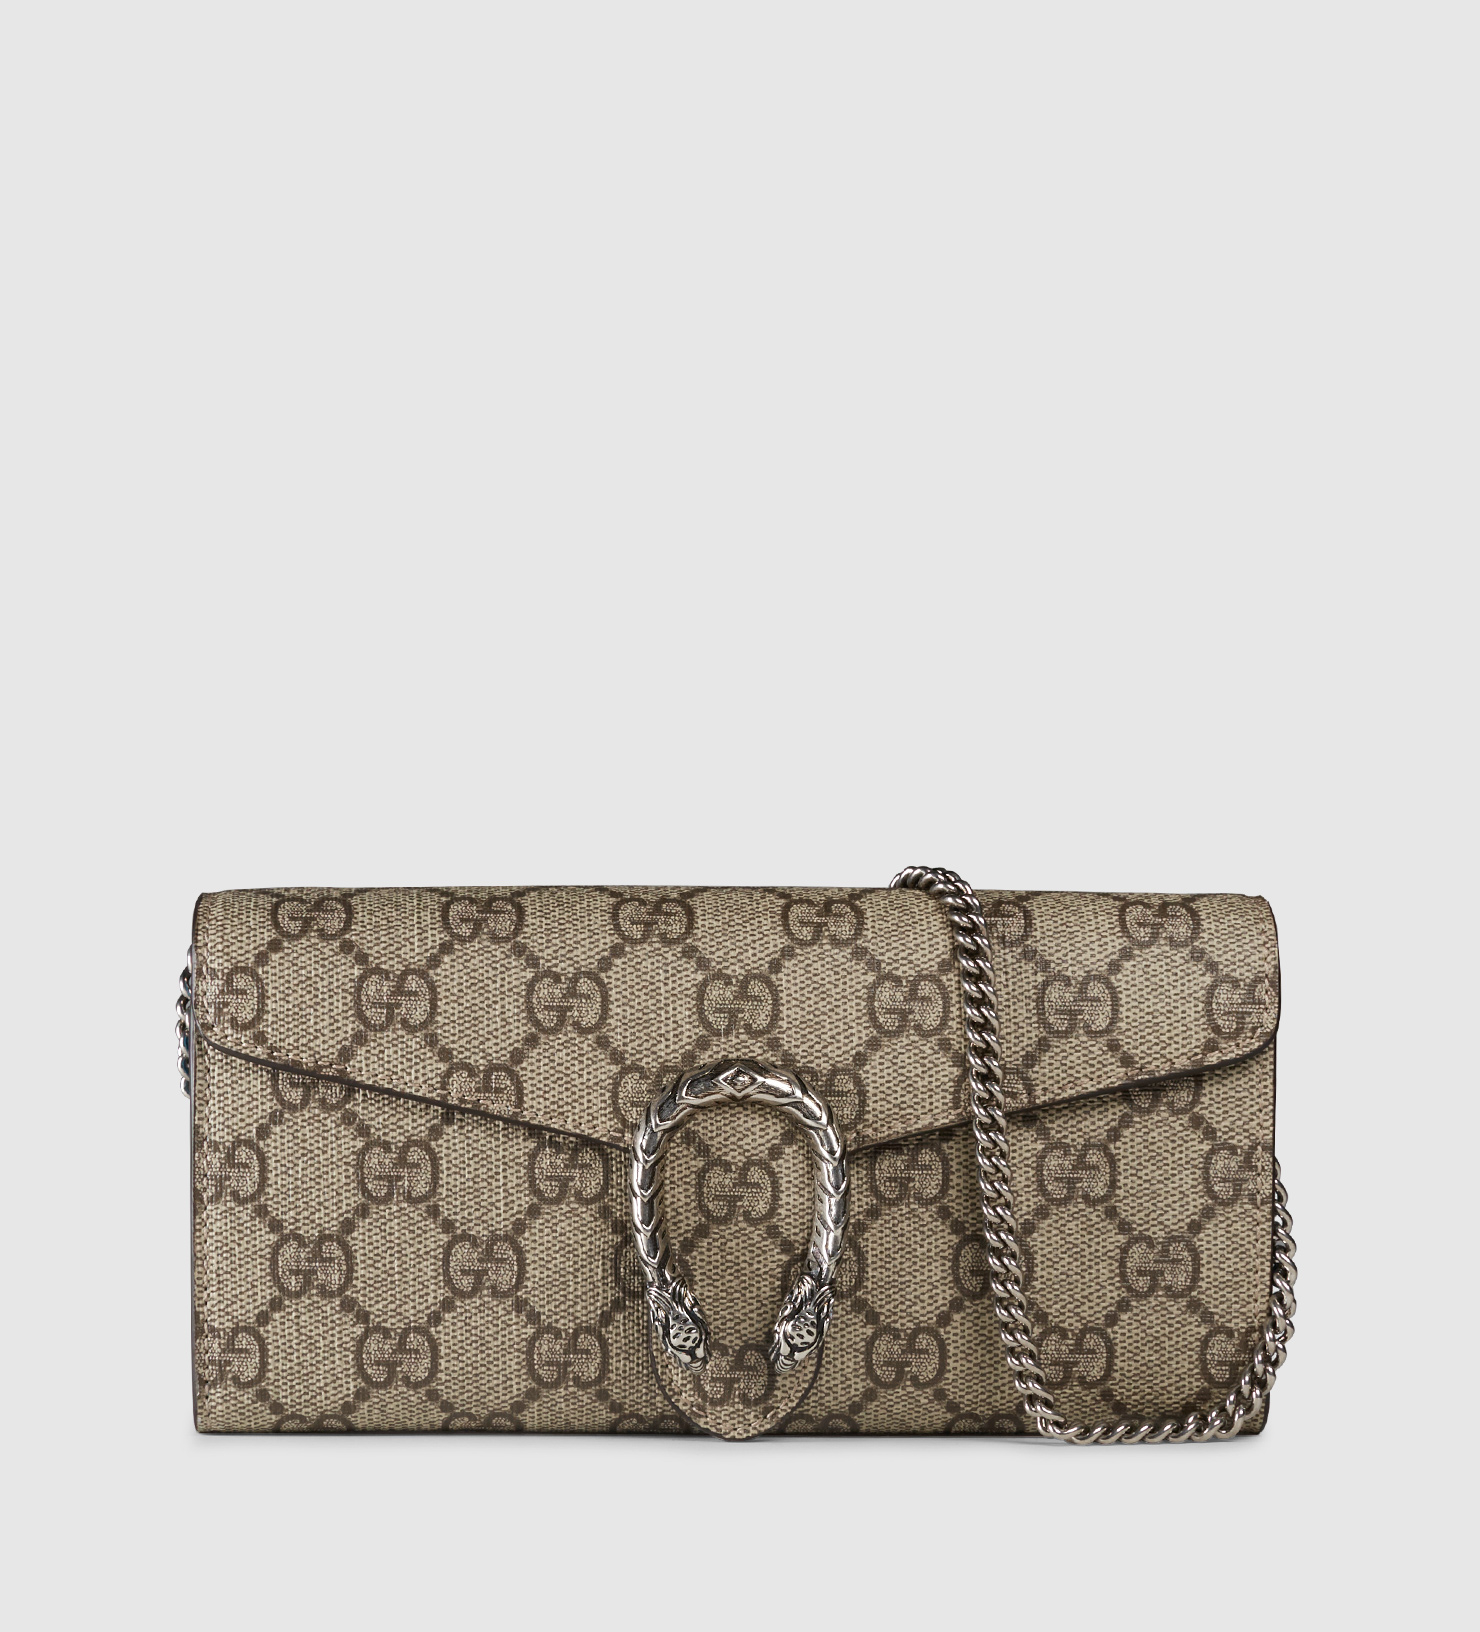 Gucci Dionysus Gg Supreme Chain Wallet in Natural - Lyst